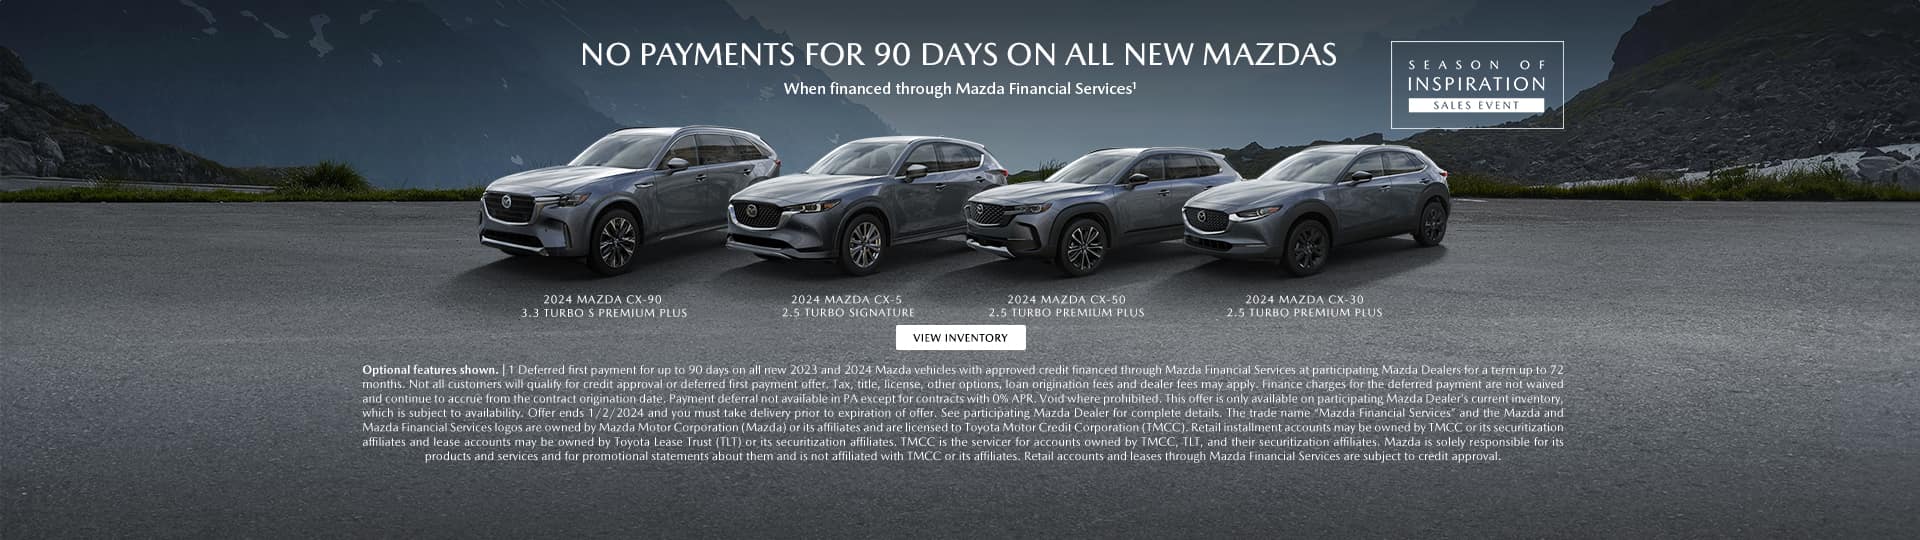 No payments for 90 days on All Mazdas